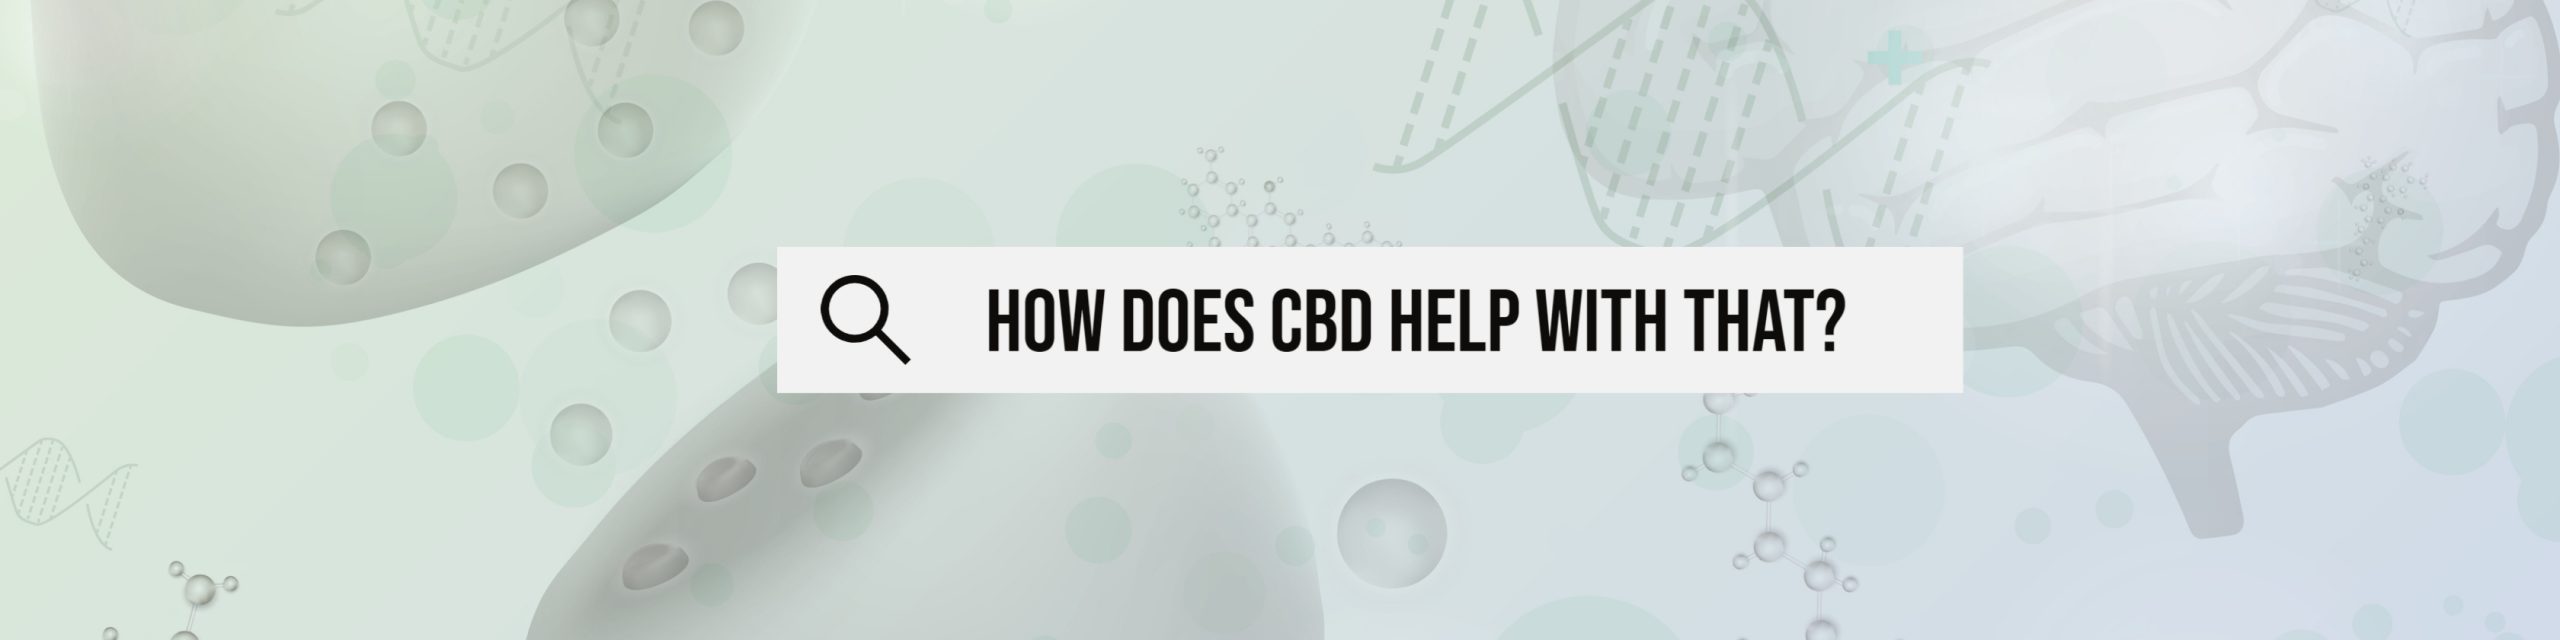 How does CBD help with that?